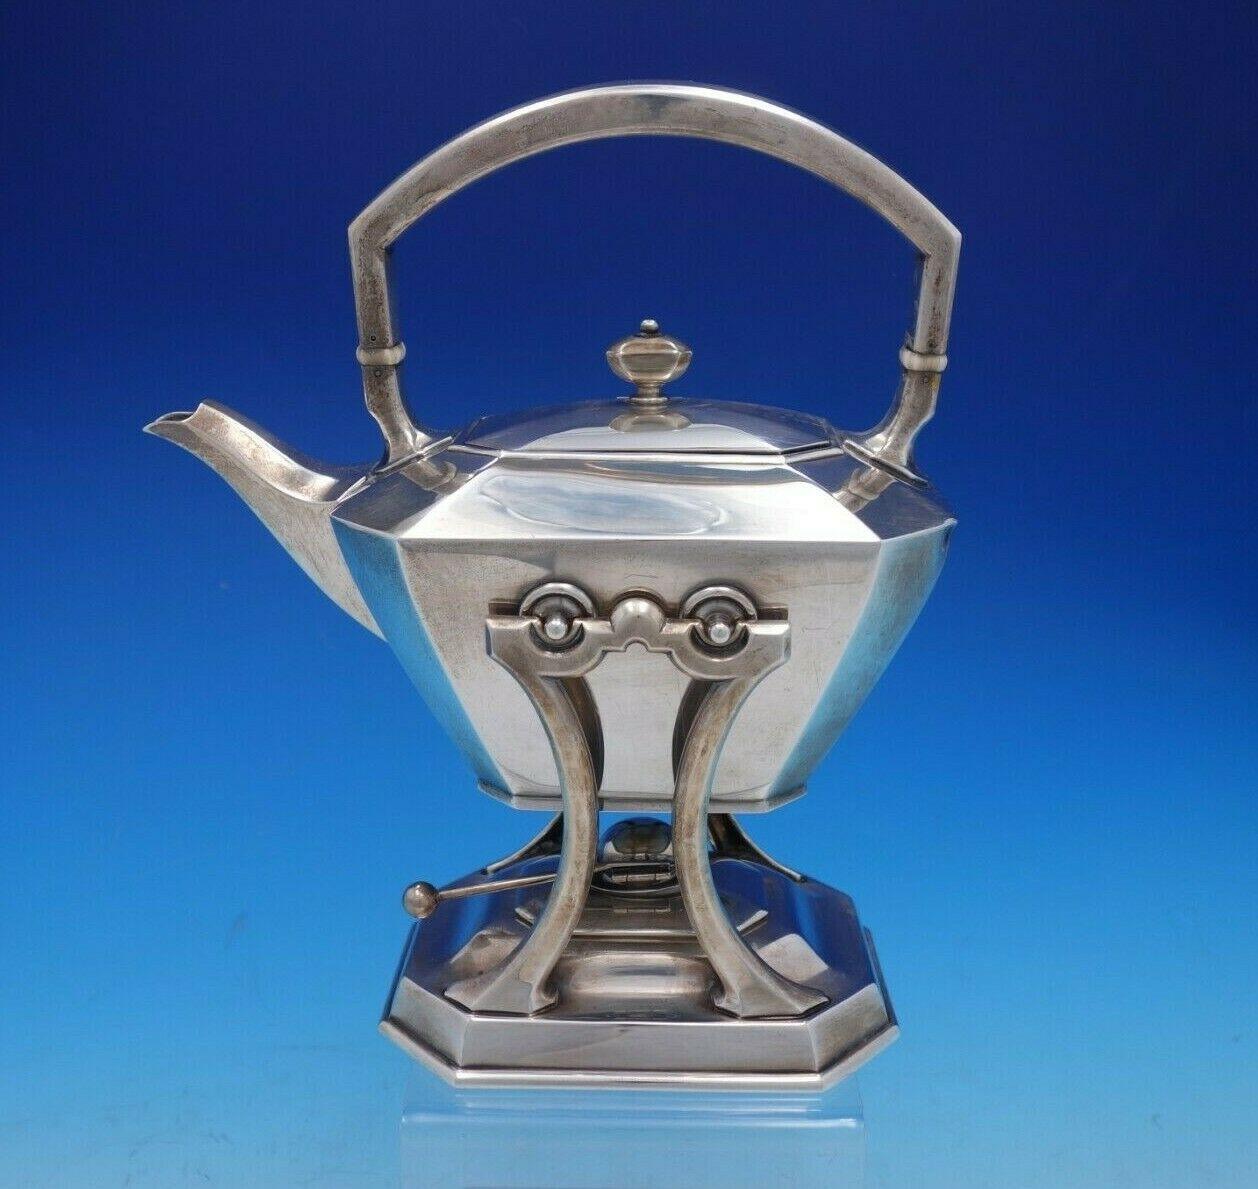 Fairfax by Durgin-Gorham

Exceptional Fairfax by Durgin-Gorham sterling silver 5-piece tea set marked #4. This set includes:

1 - Kettle on stand: Holds 2 pints, measures 10 3/4